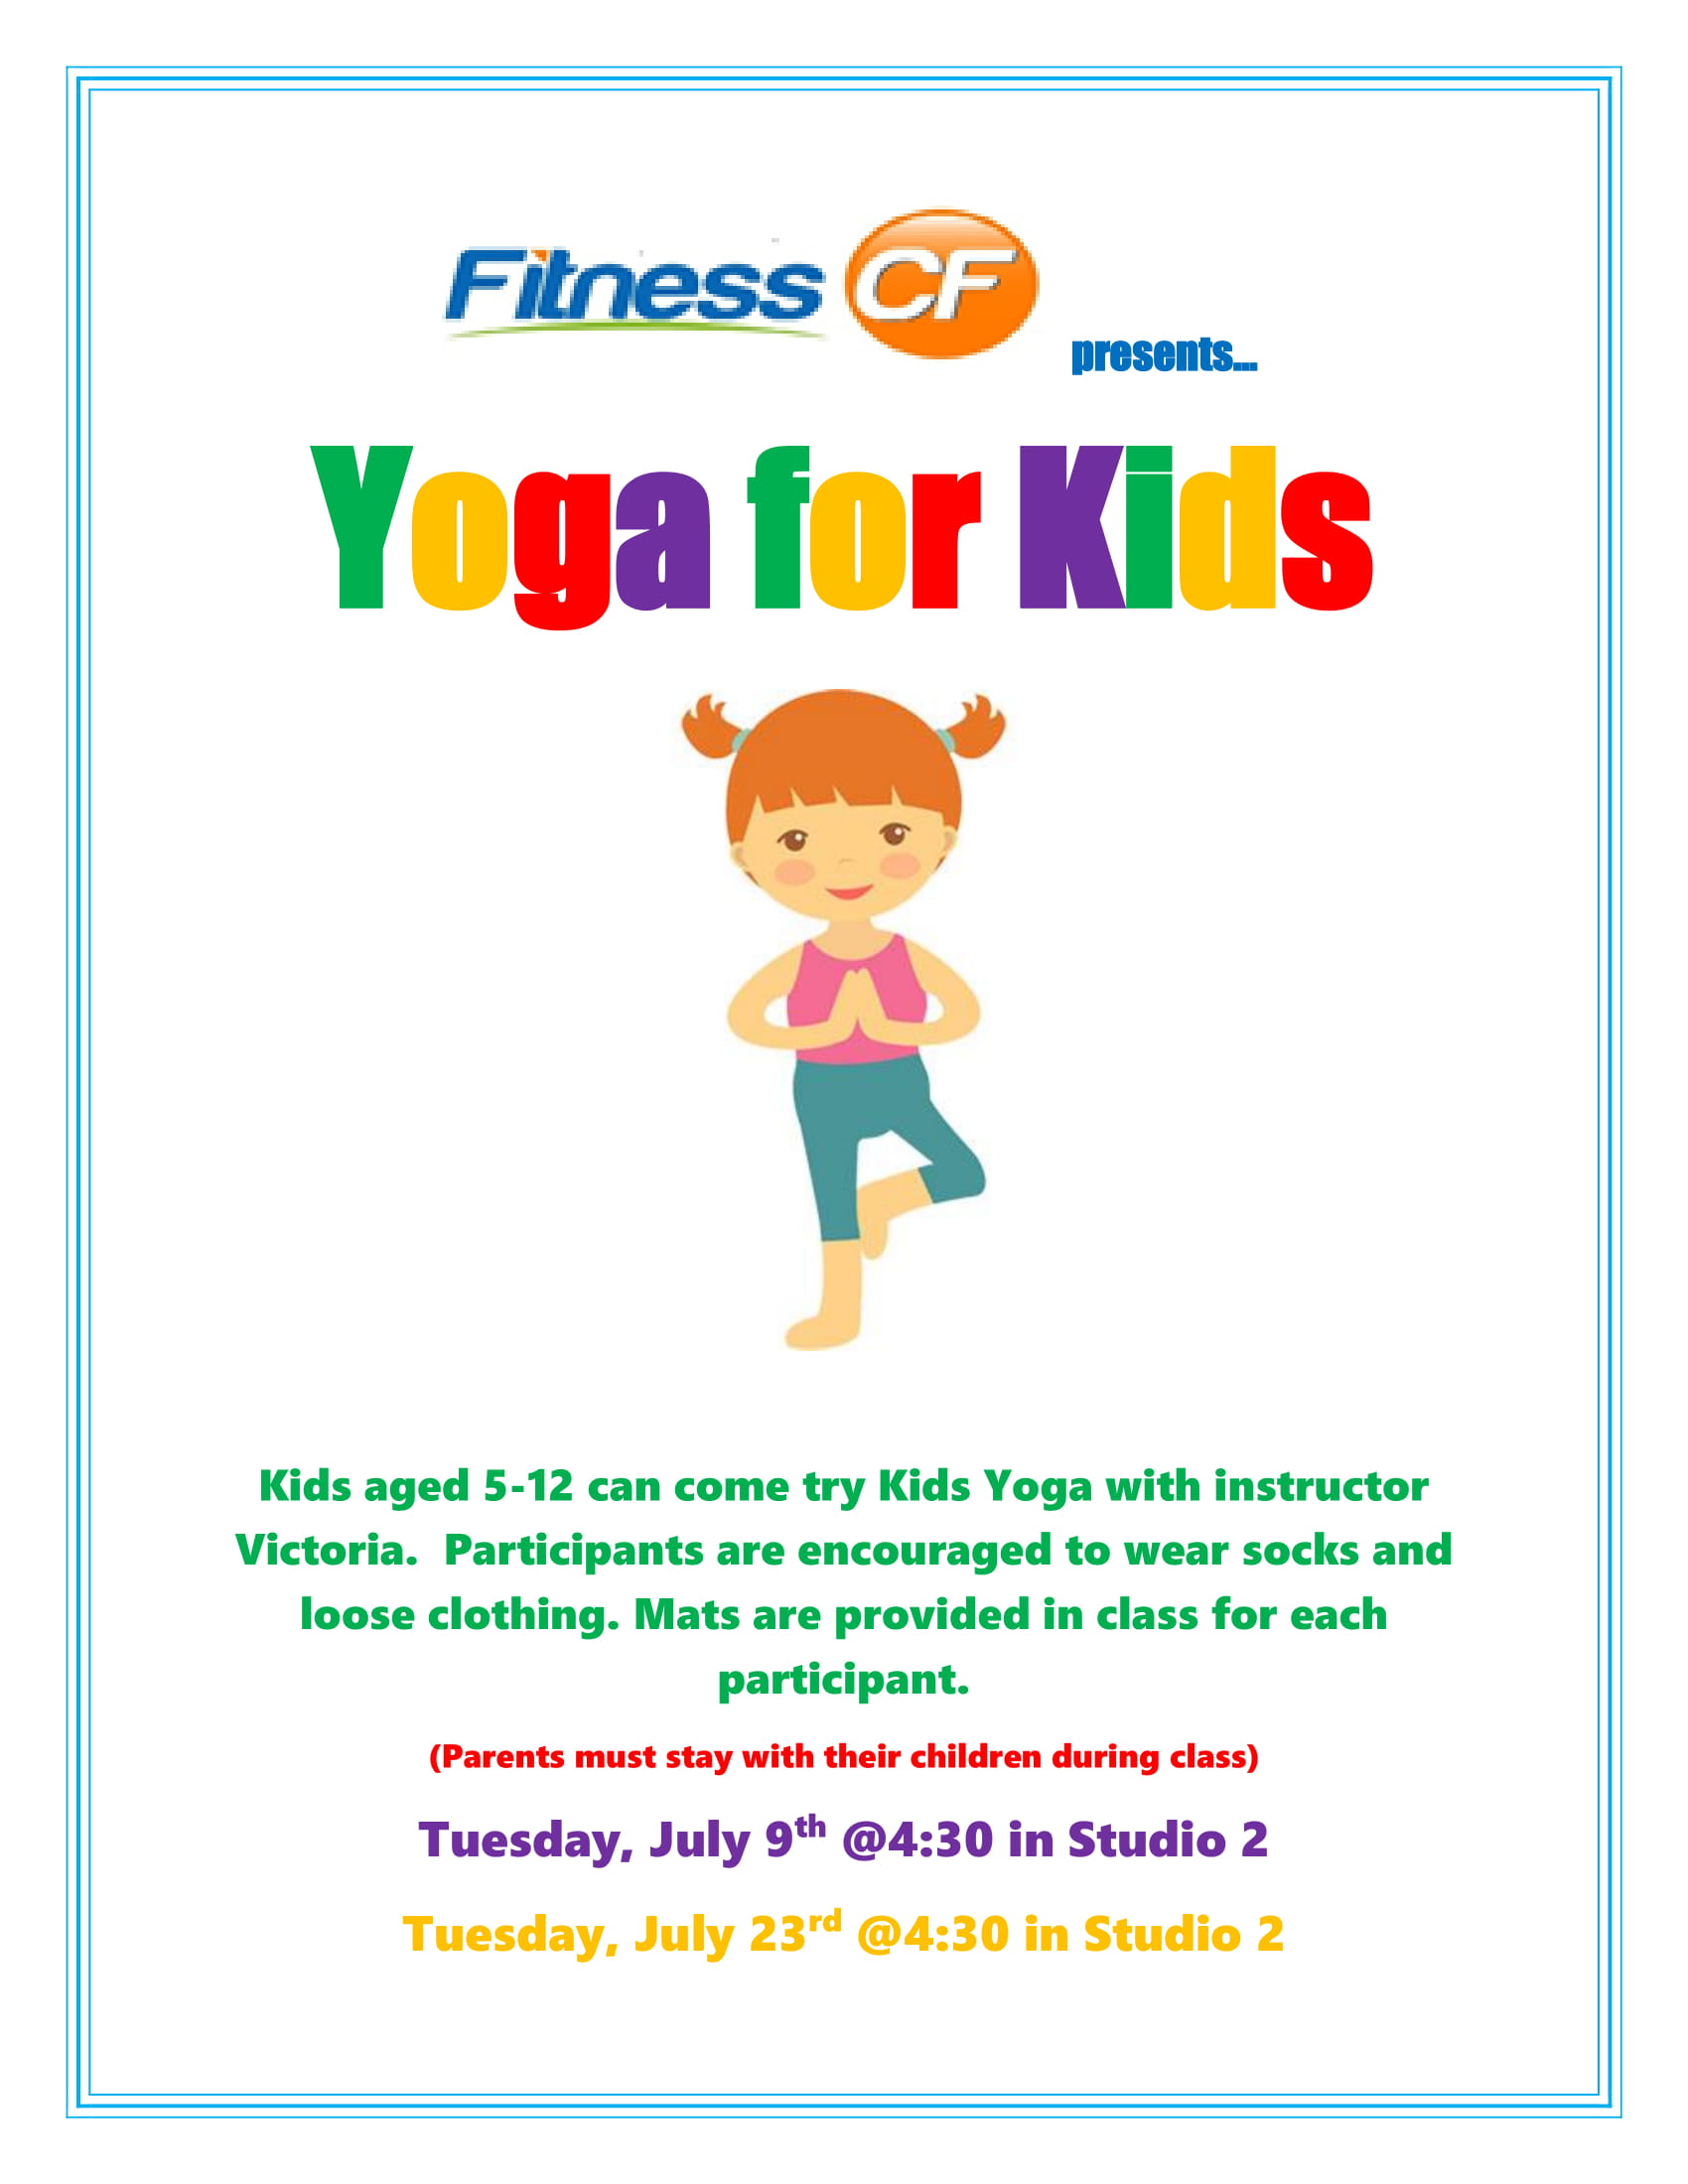 Yoga for Kids at Fitness CF!